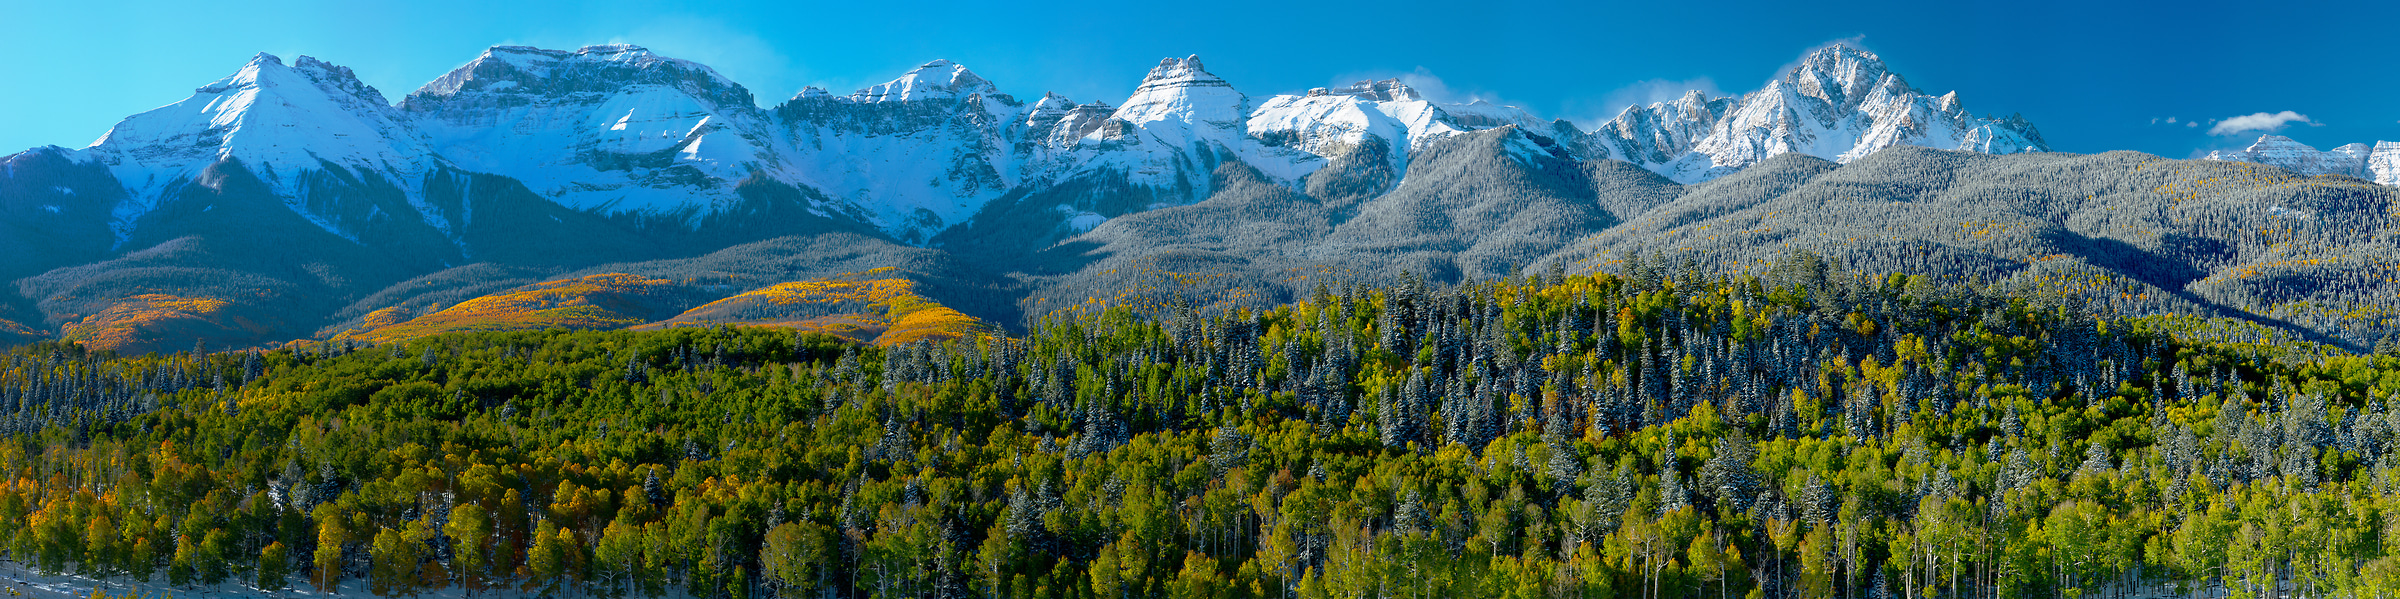 1,152 megapixels! A very high resolution, large-format VAST photo print of a snow-covered mountain range with forests in the foreground; landscape photograph created by John Freeman in Mt. Sneffles, Ridgway, Colorado.